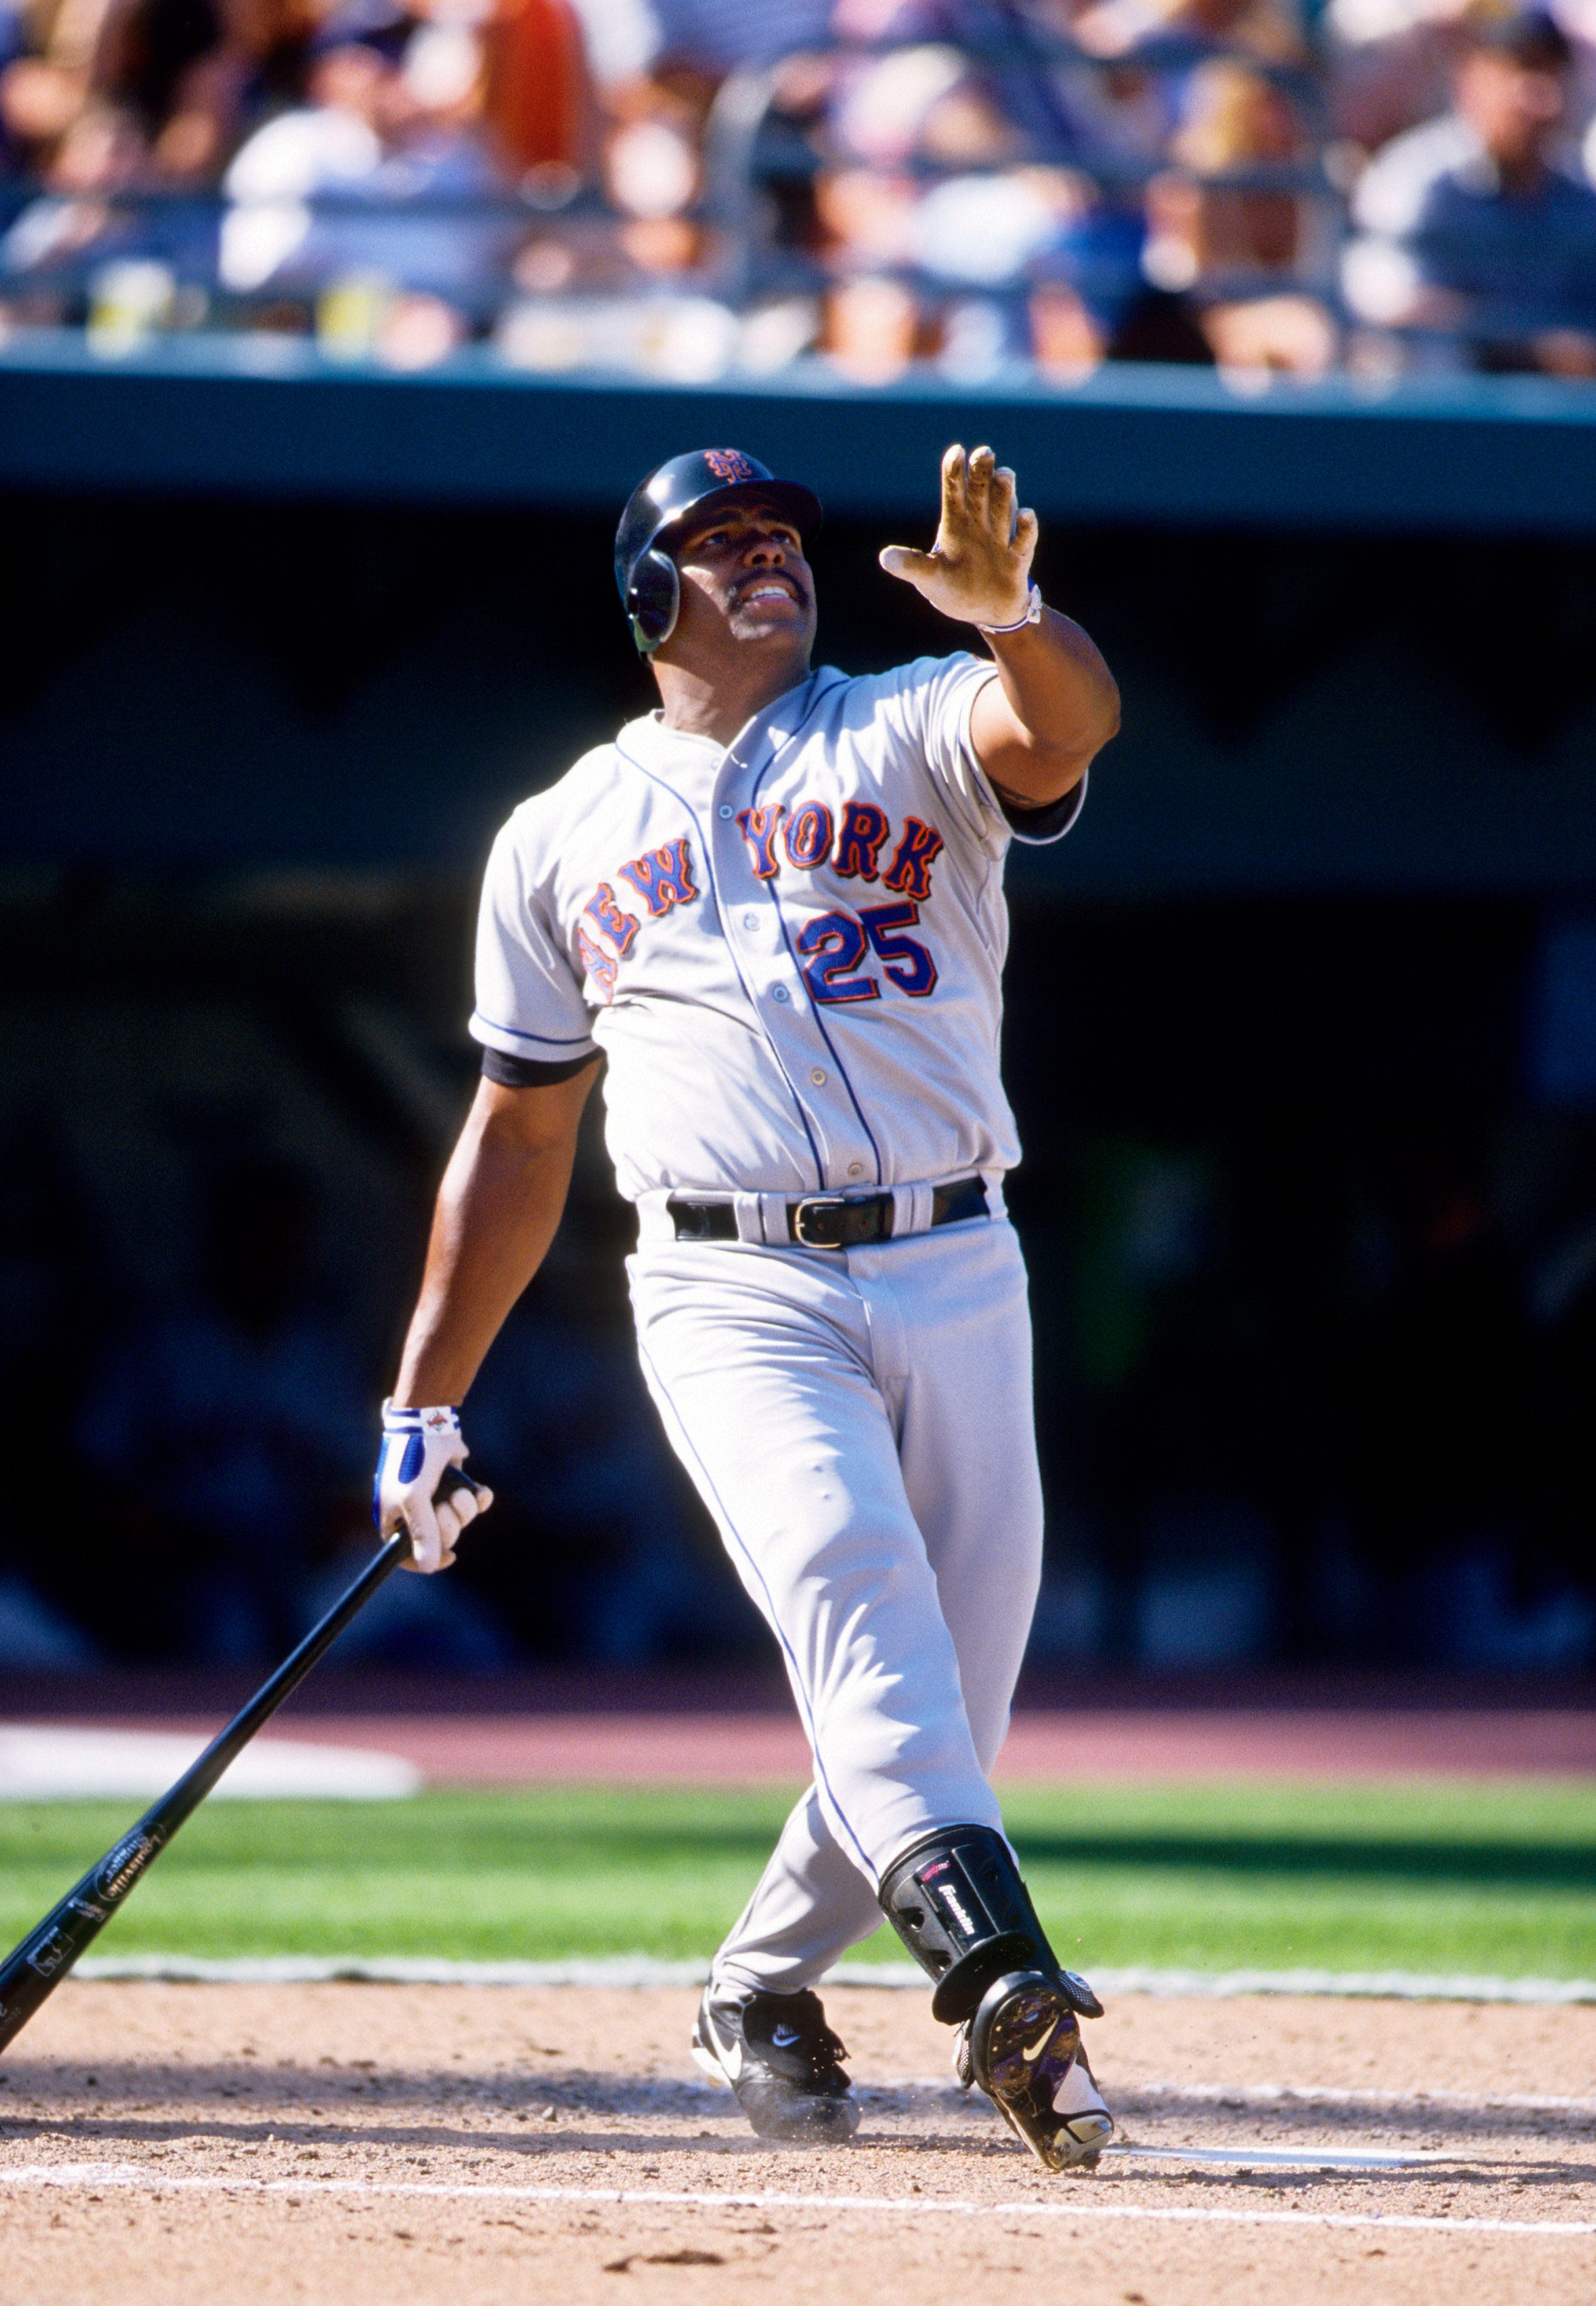 Bobby Bonilla Day: Why the Mets keep paying $1.19 million to former All-Star every year